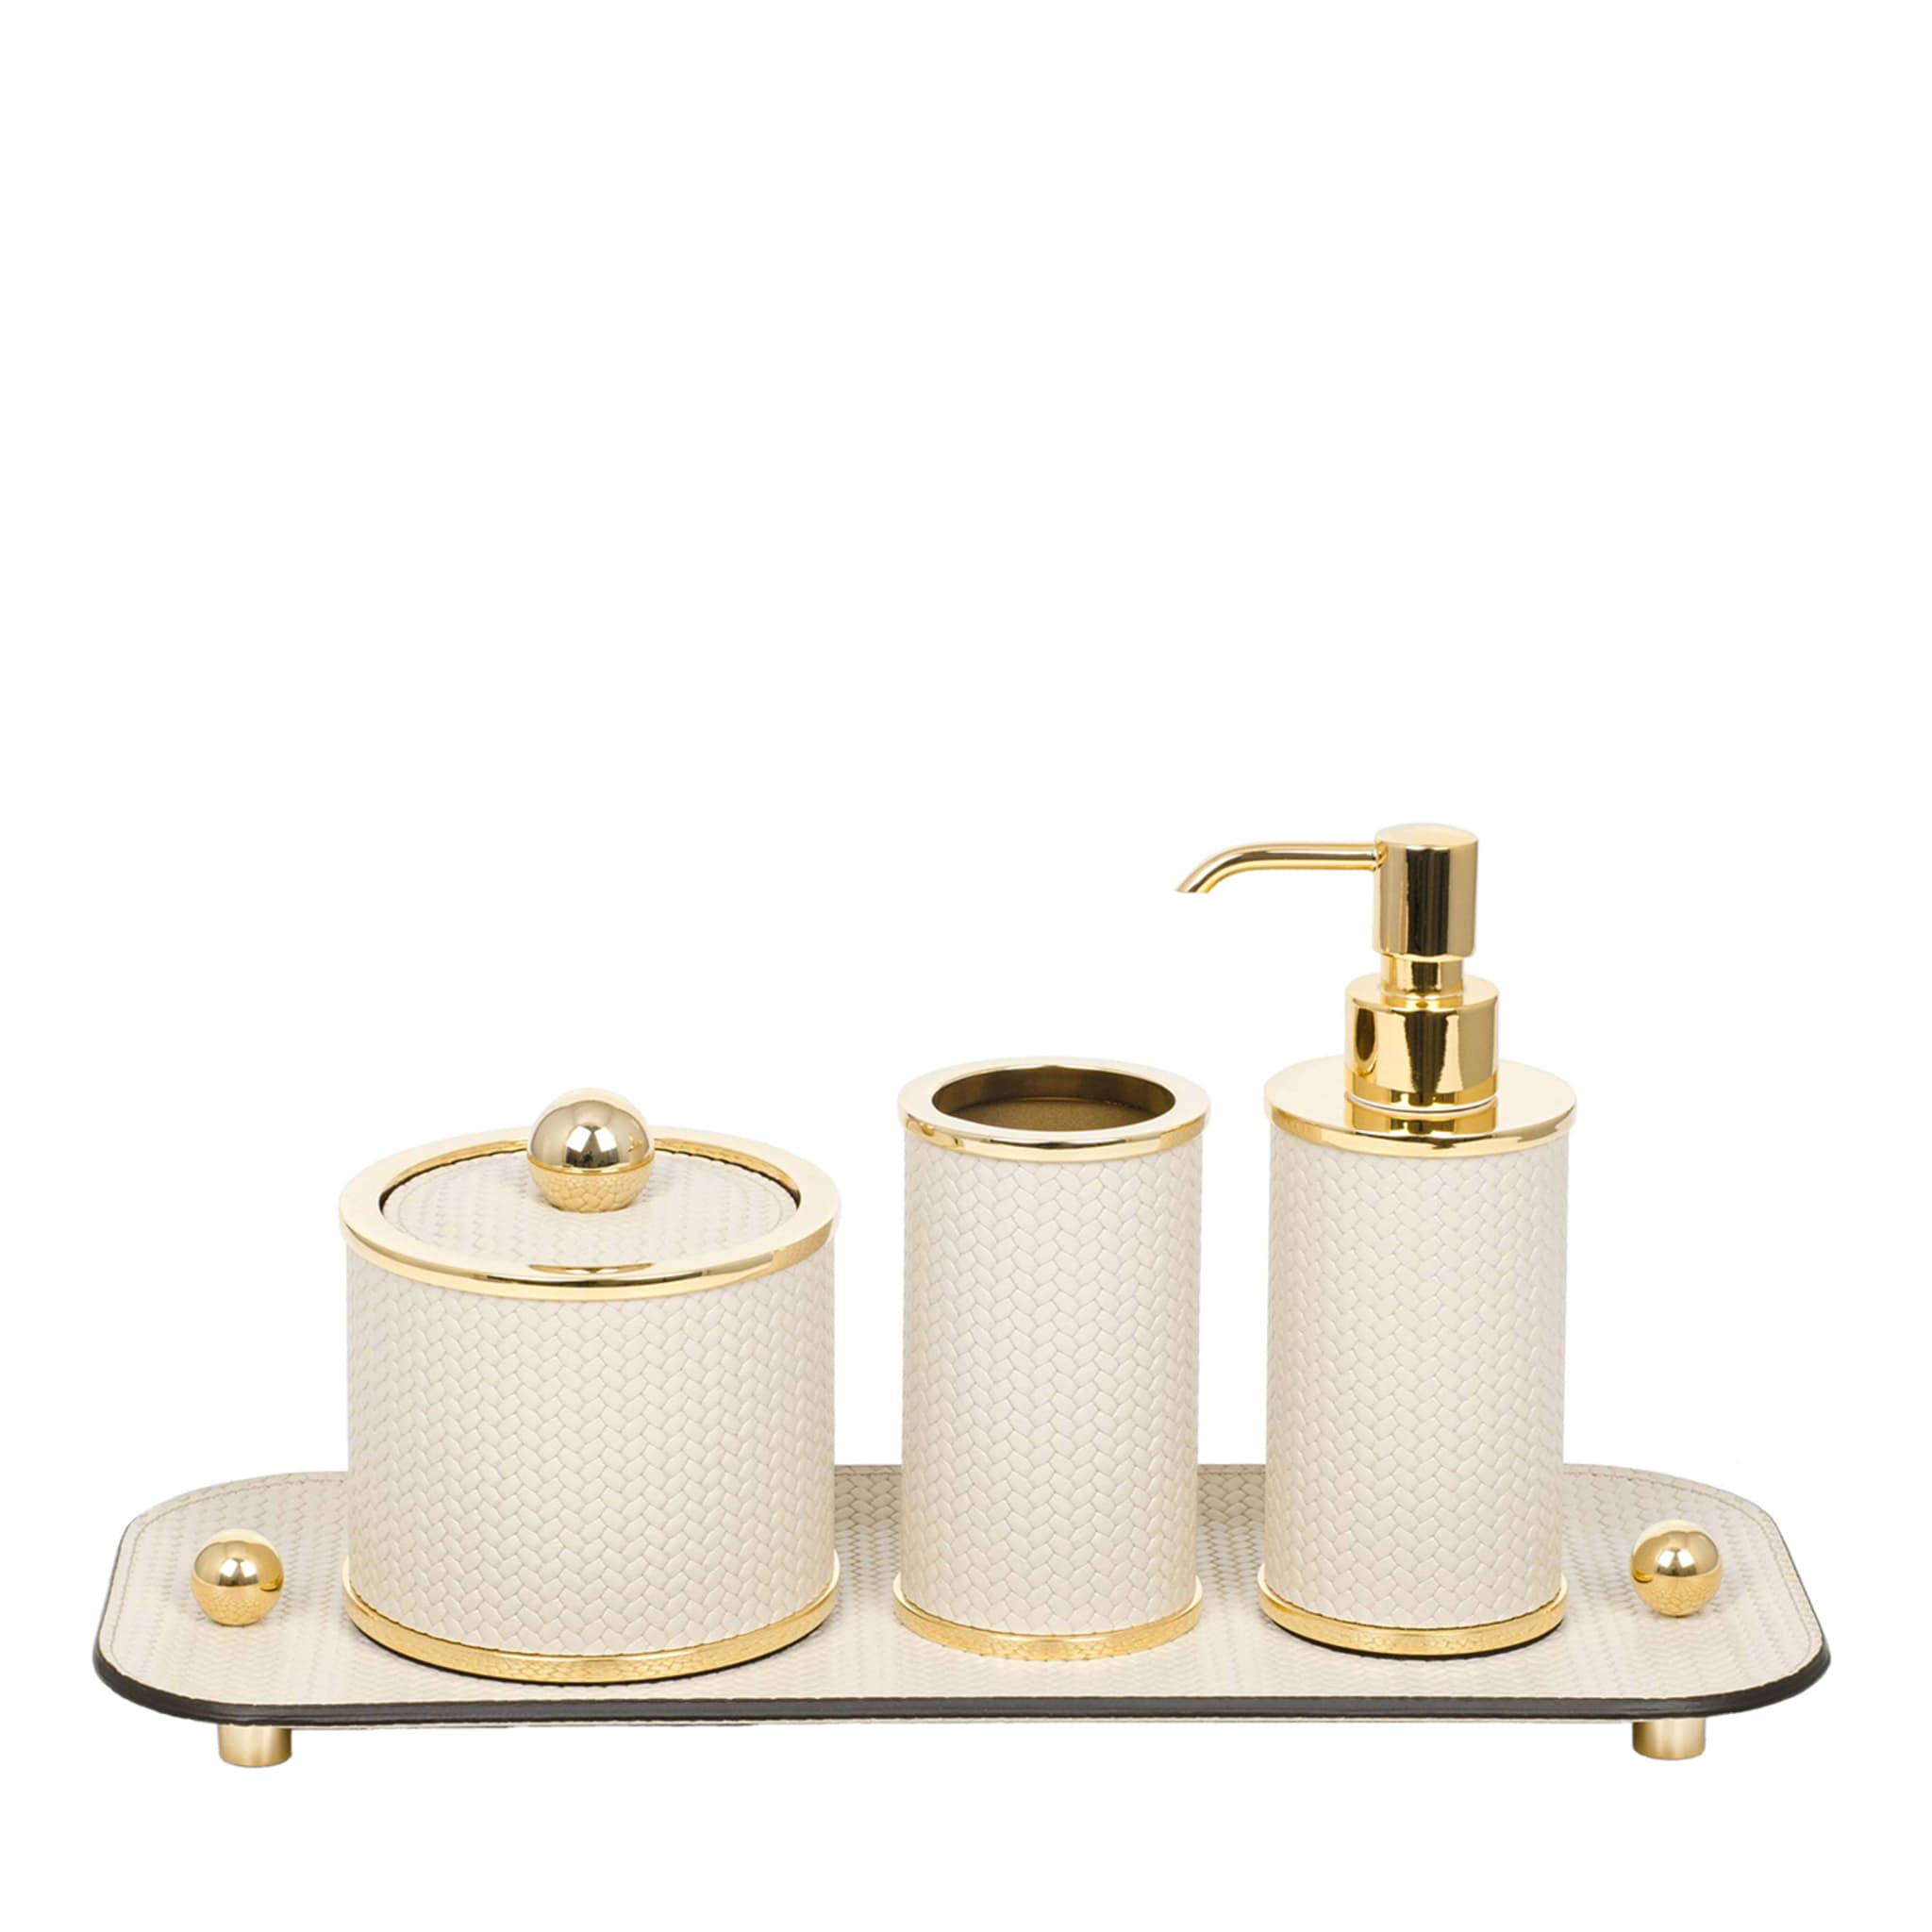 Fapully Bathroom Sets Accessories,16-Inch Brushed Nickel Bathroom  Accessories Ha